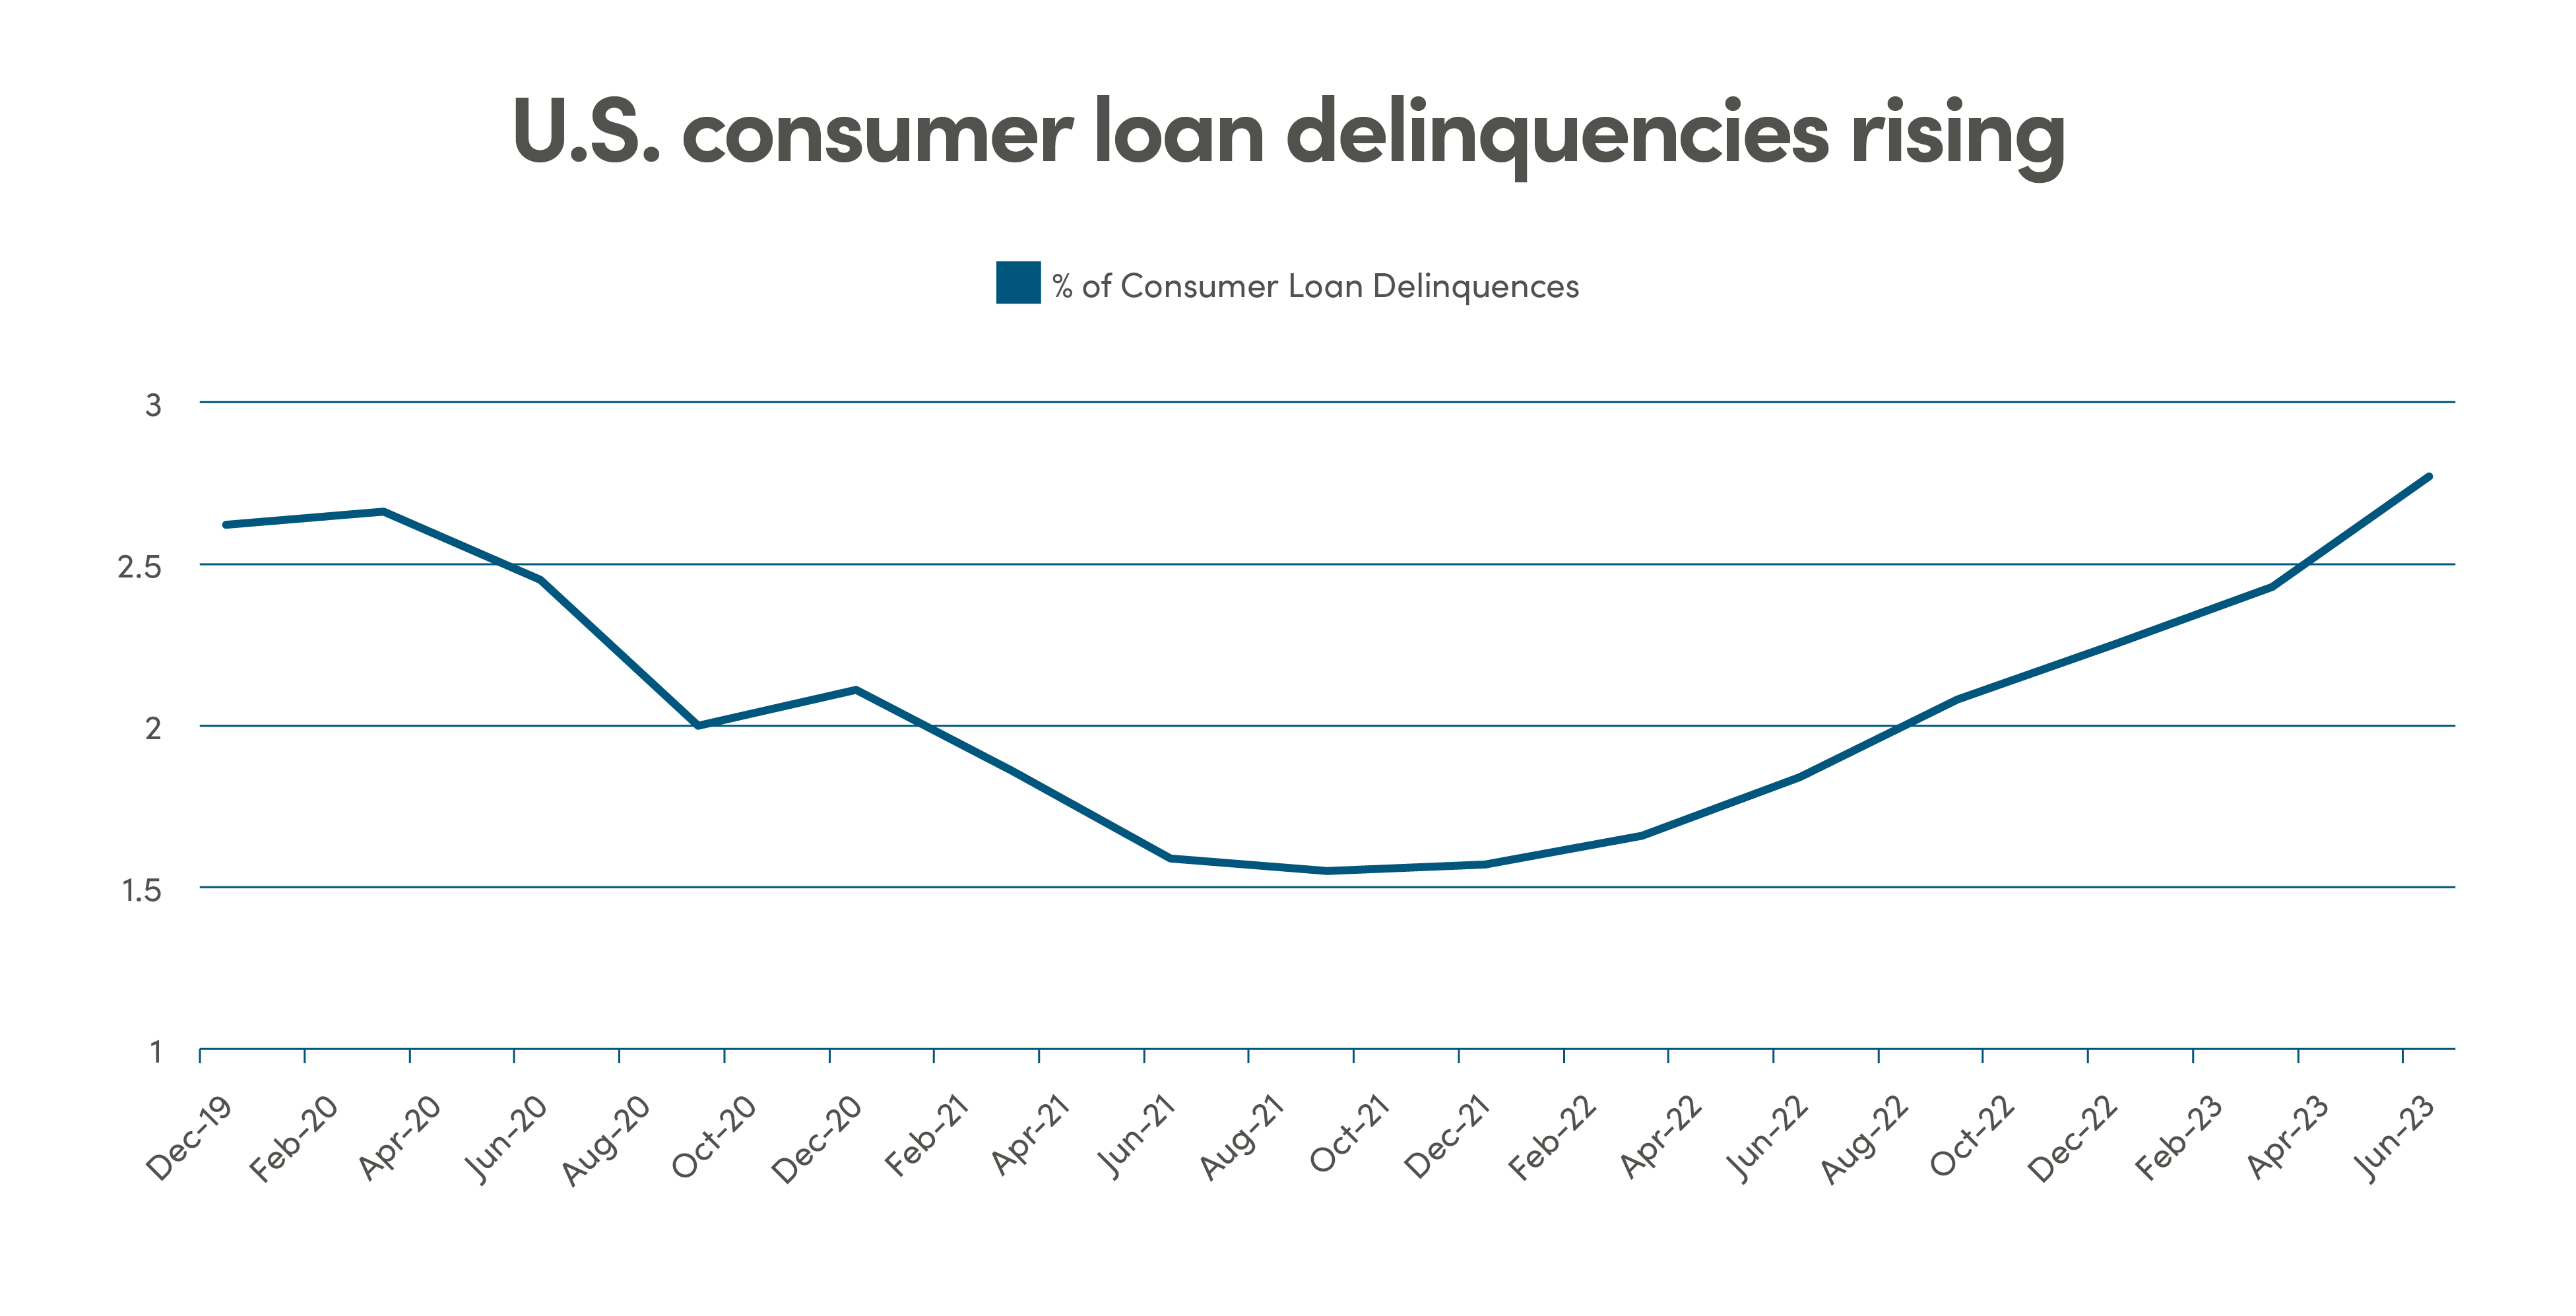 Line graph showing the percentage of US consumer loan delinquencies rising, from December 2019 to June 2023. The graph starts slightly higher than 2.5% in 2019, dips to it's lowest in August 2021 and then has been slowly increasing back to over 2.5% as of June 2023